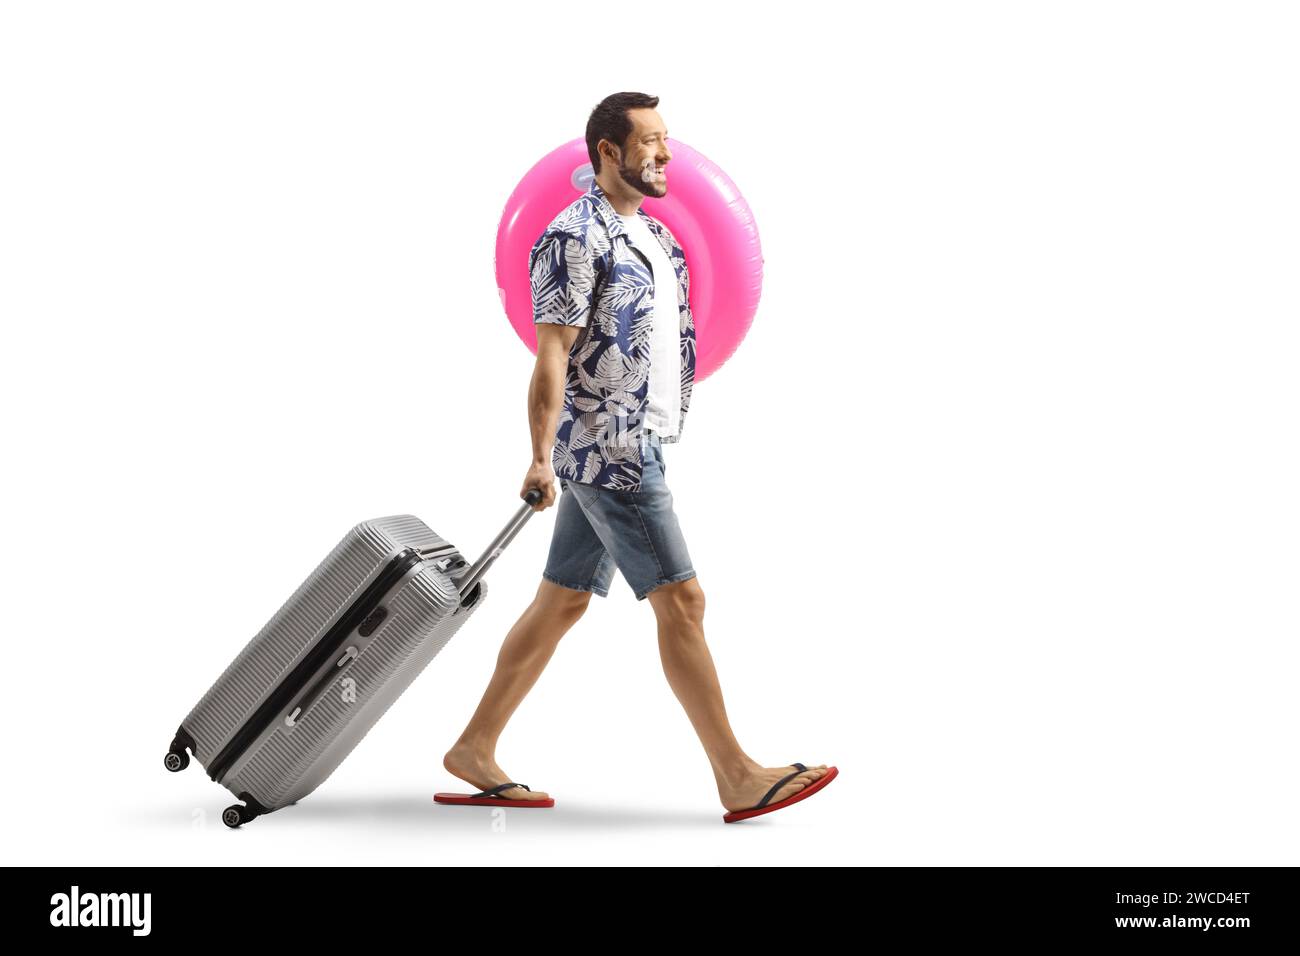 Man pulling a suitcase smiling and carrying a swimming ring isolated on white background Stock Photo